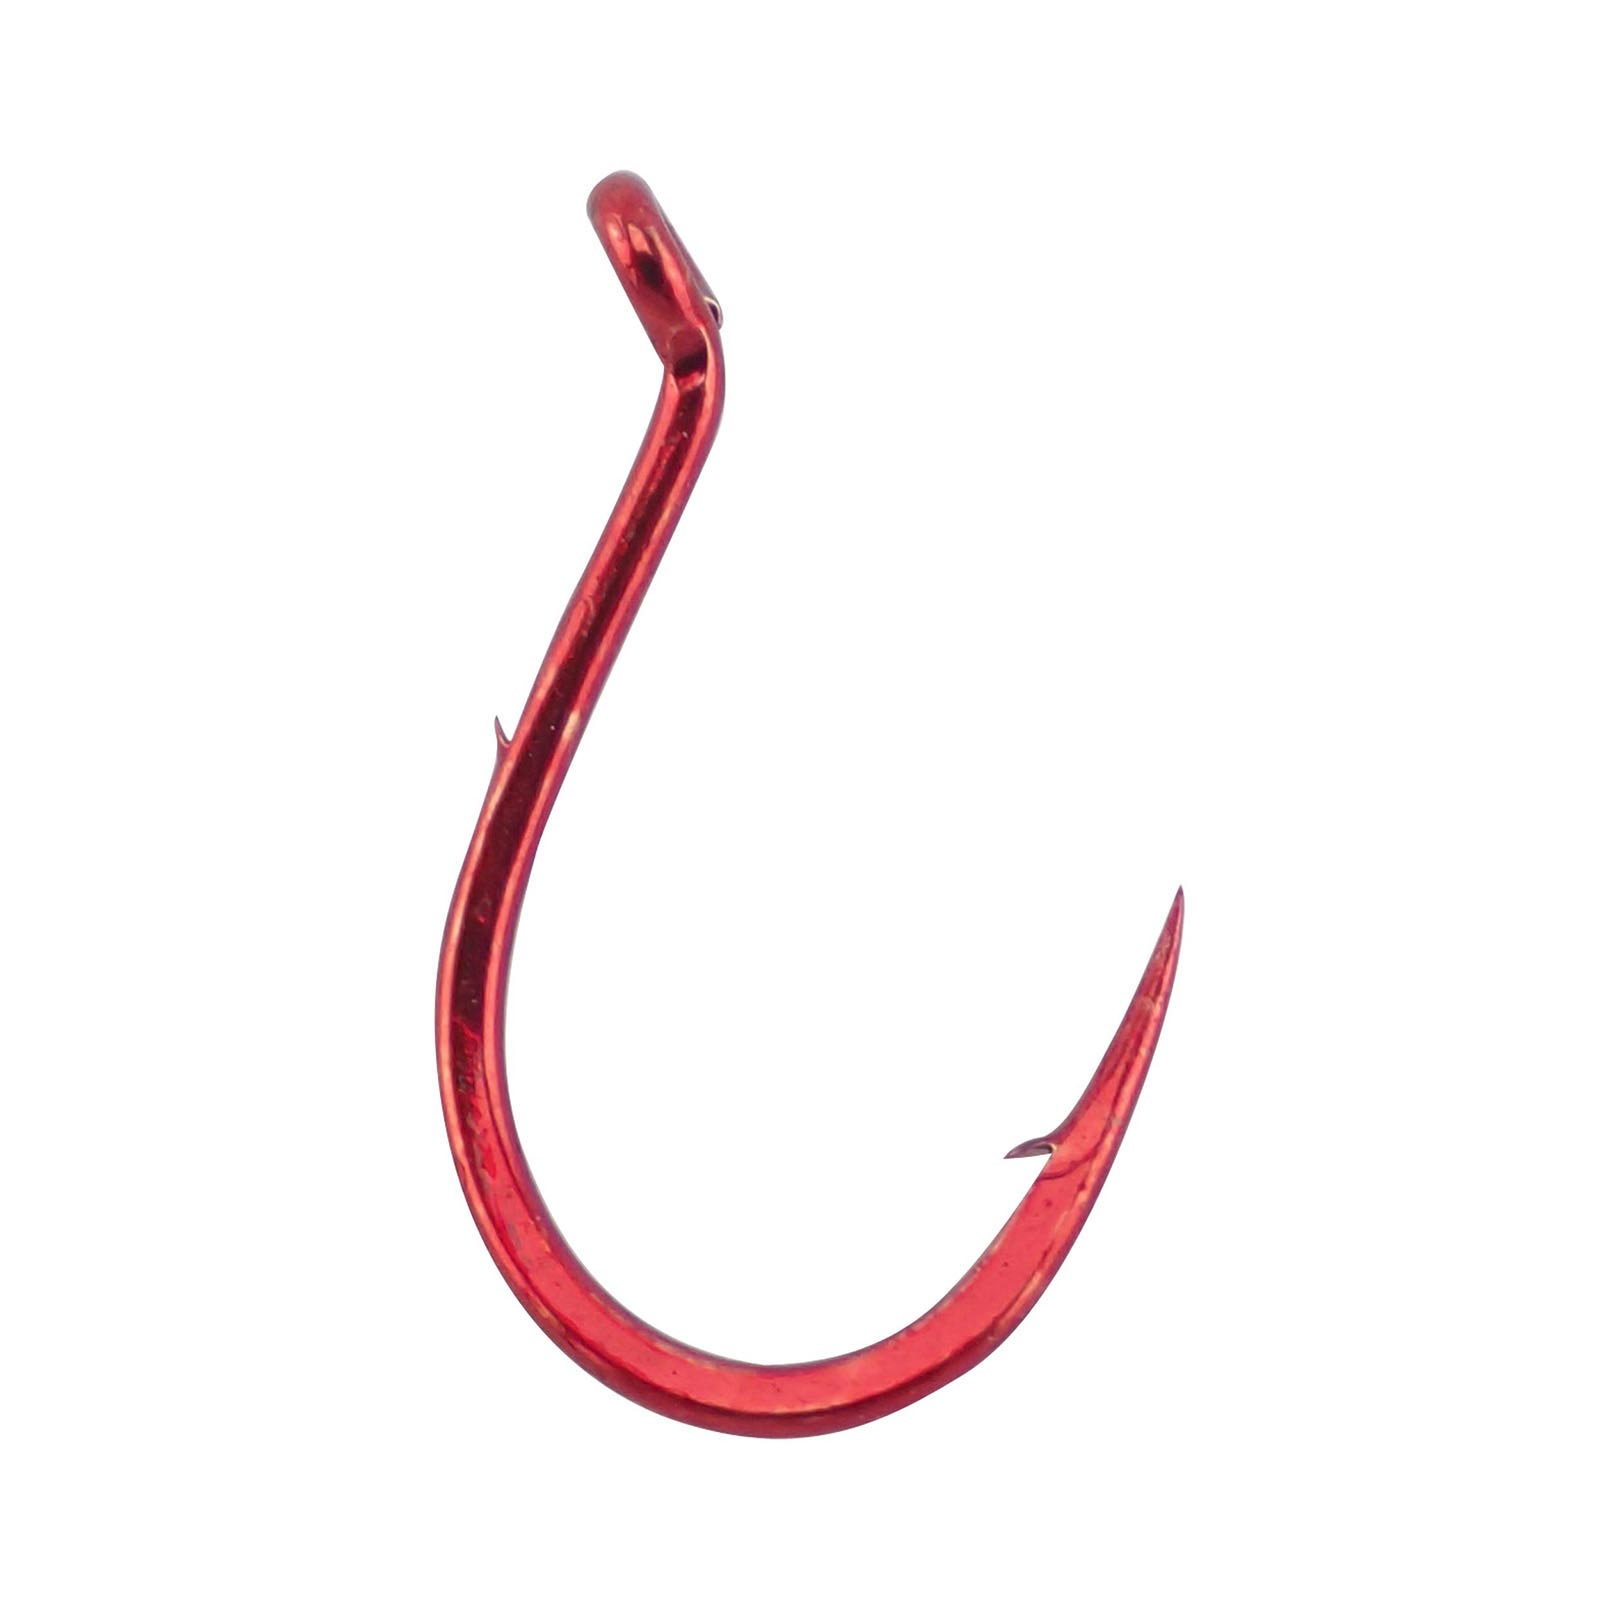 Mosquito circle hook – Taps and Tackle Co.